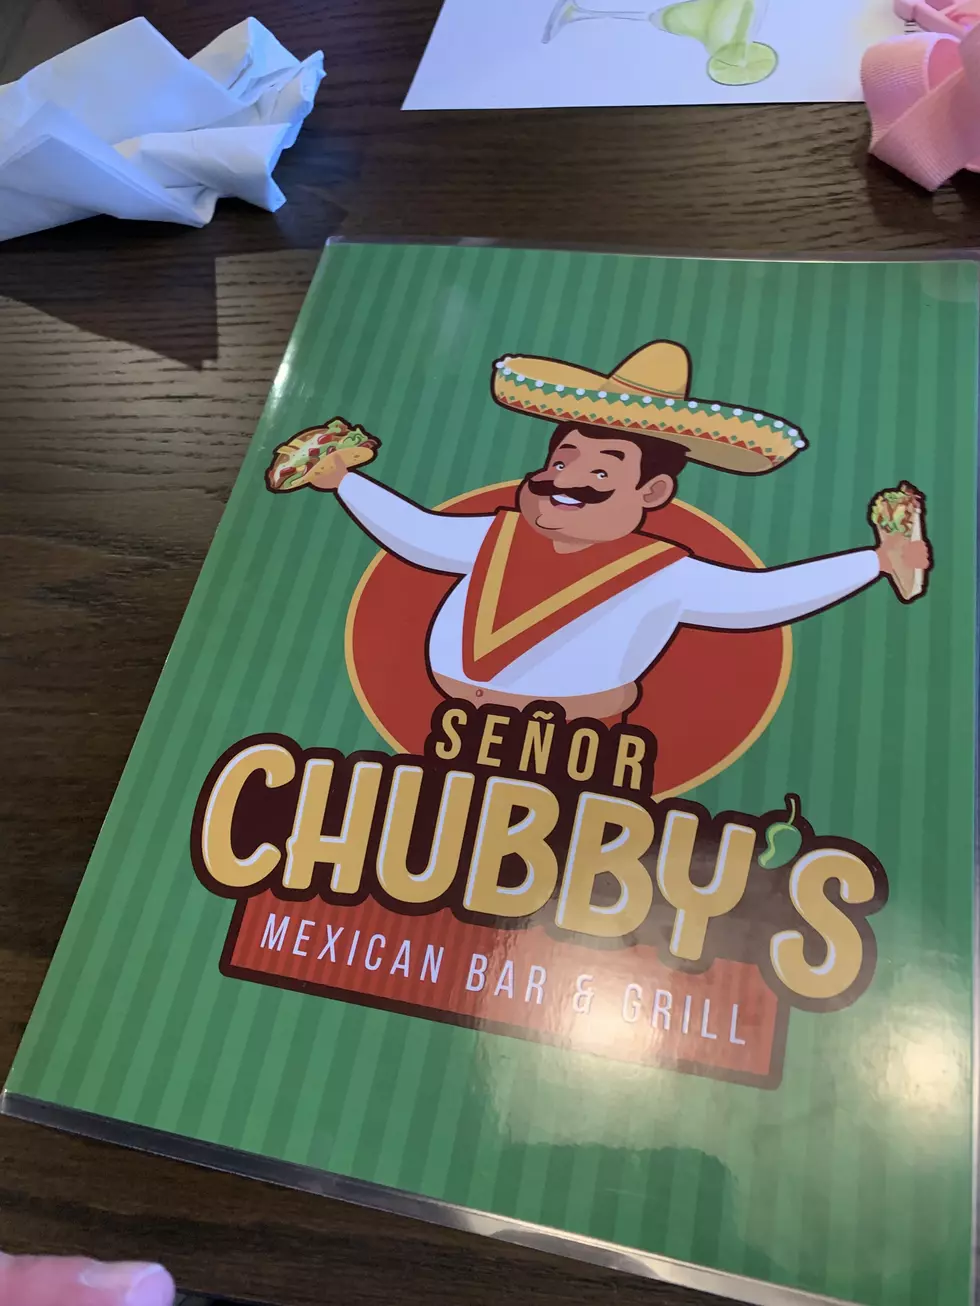 Review: Amarillo&#8217;s Senor Chubby&#8217;s Mexican Bar &#038; Grill